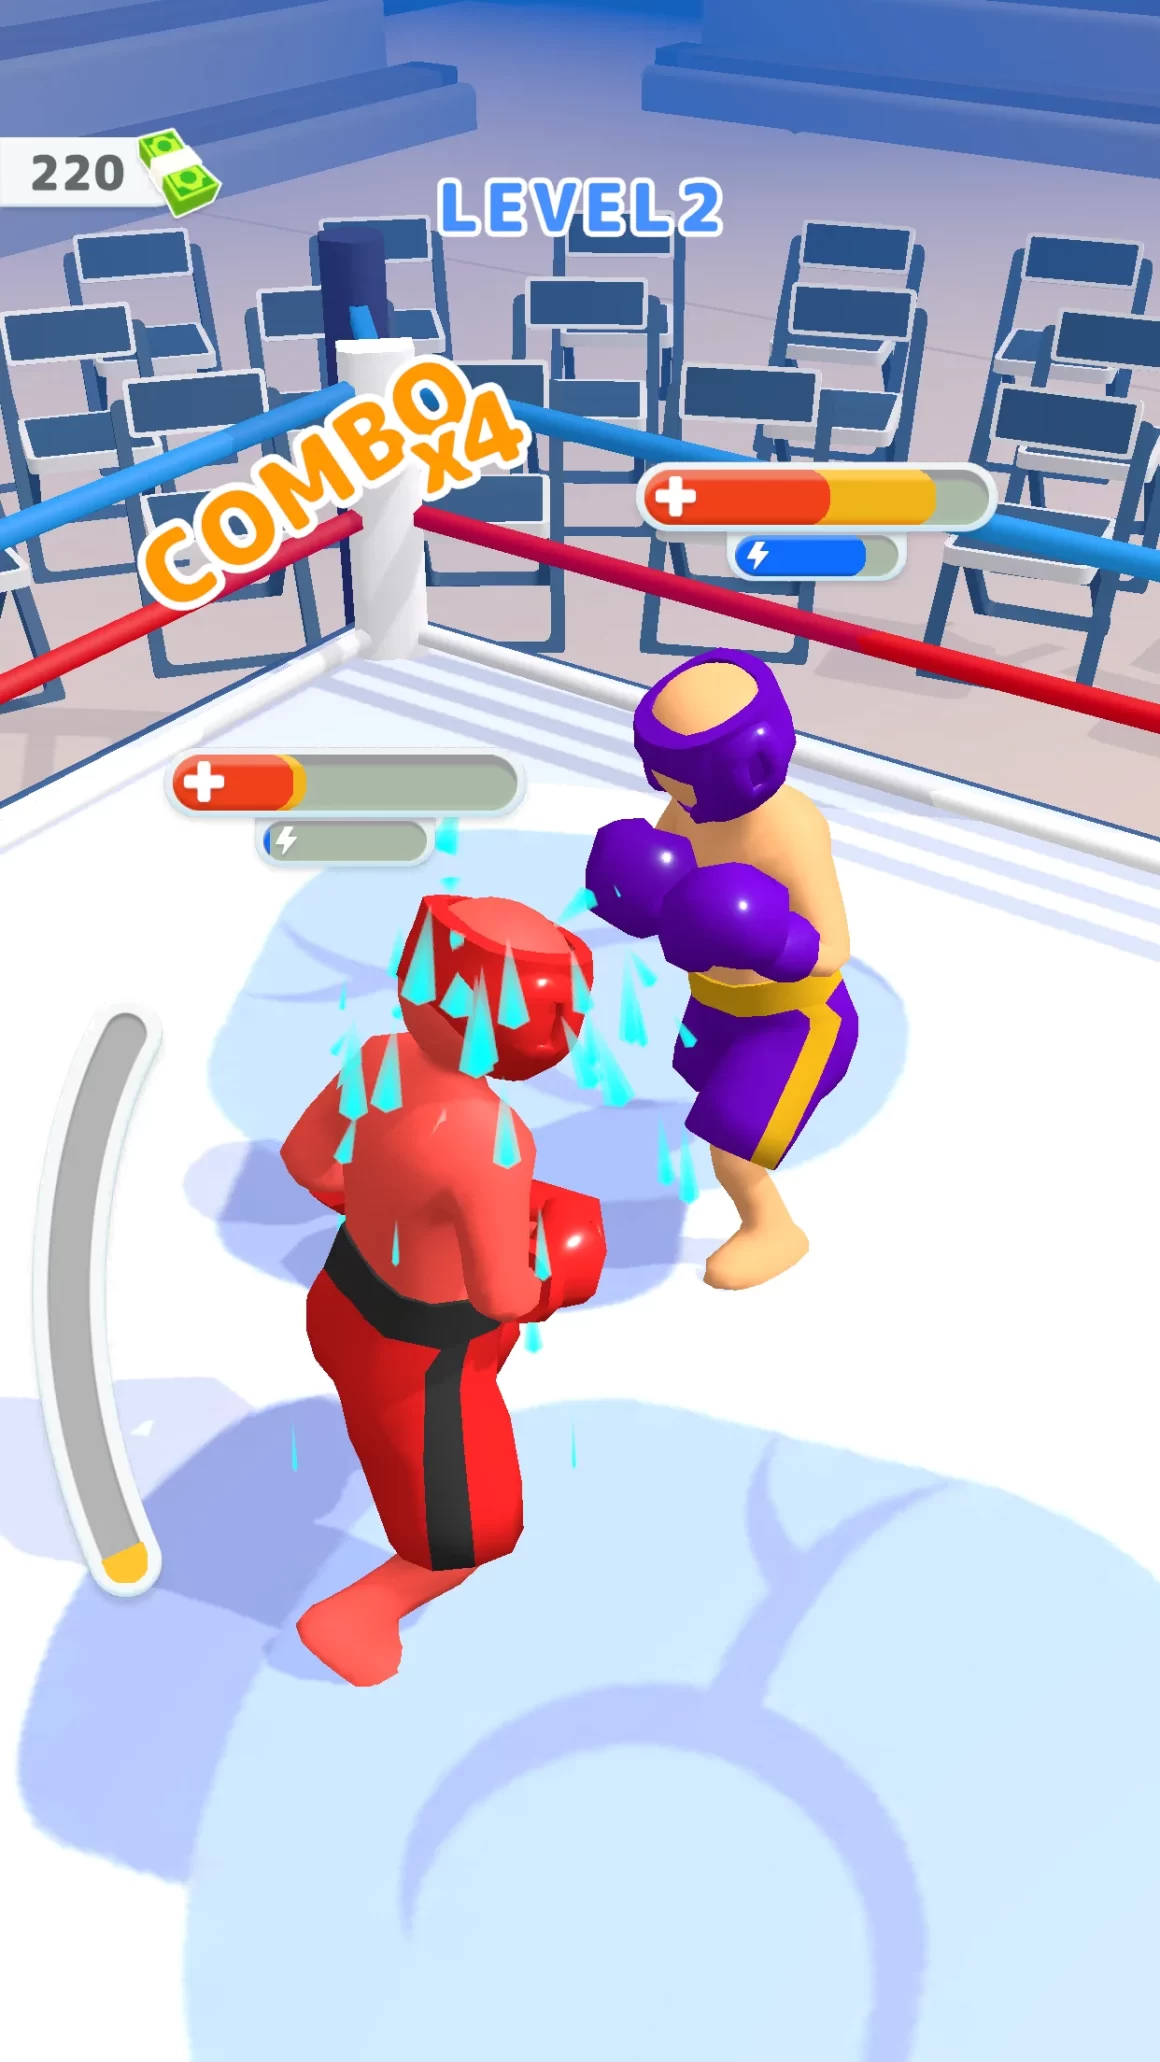 unnamed 6 4 1160x2062 - Punch Guys Mod Apk V2.6.5 (Unlimited Money) Latest Version